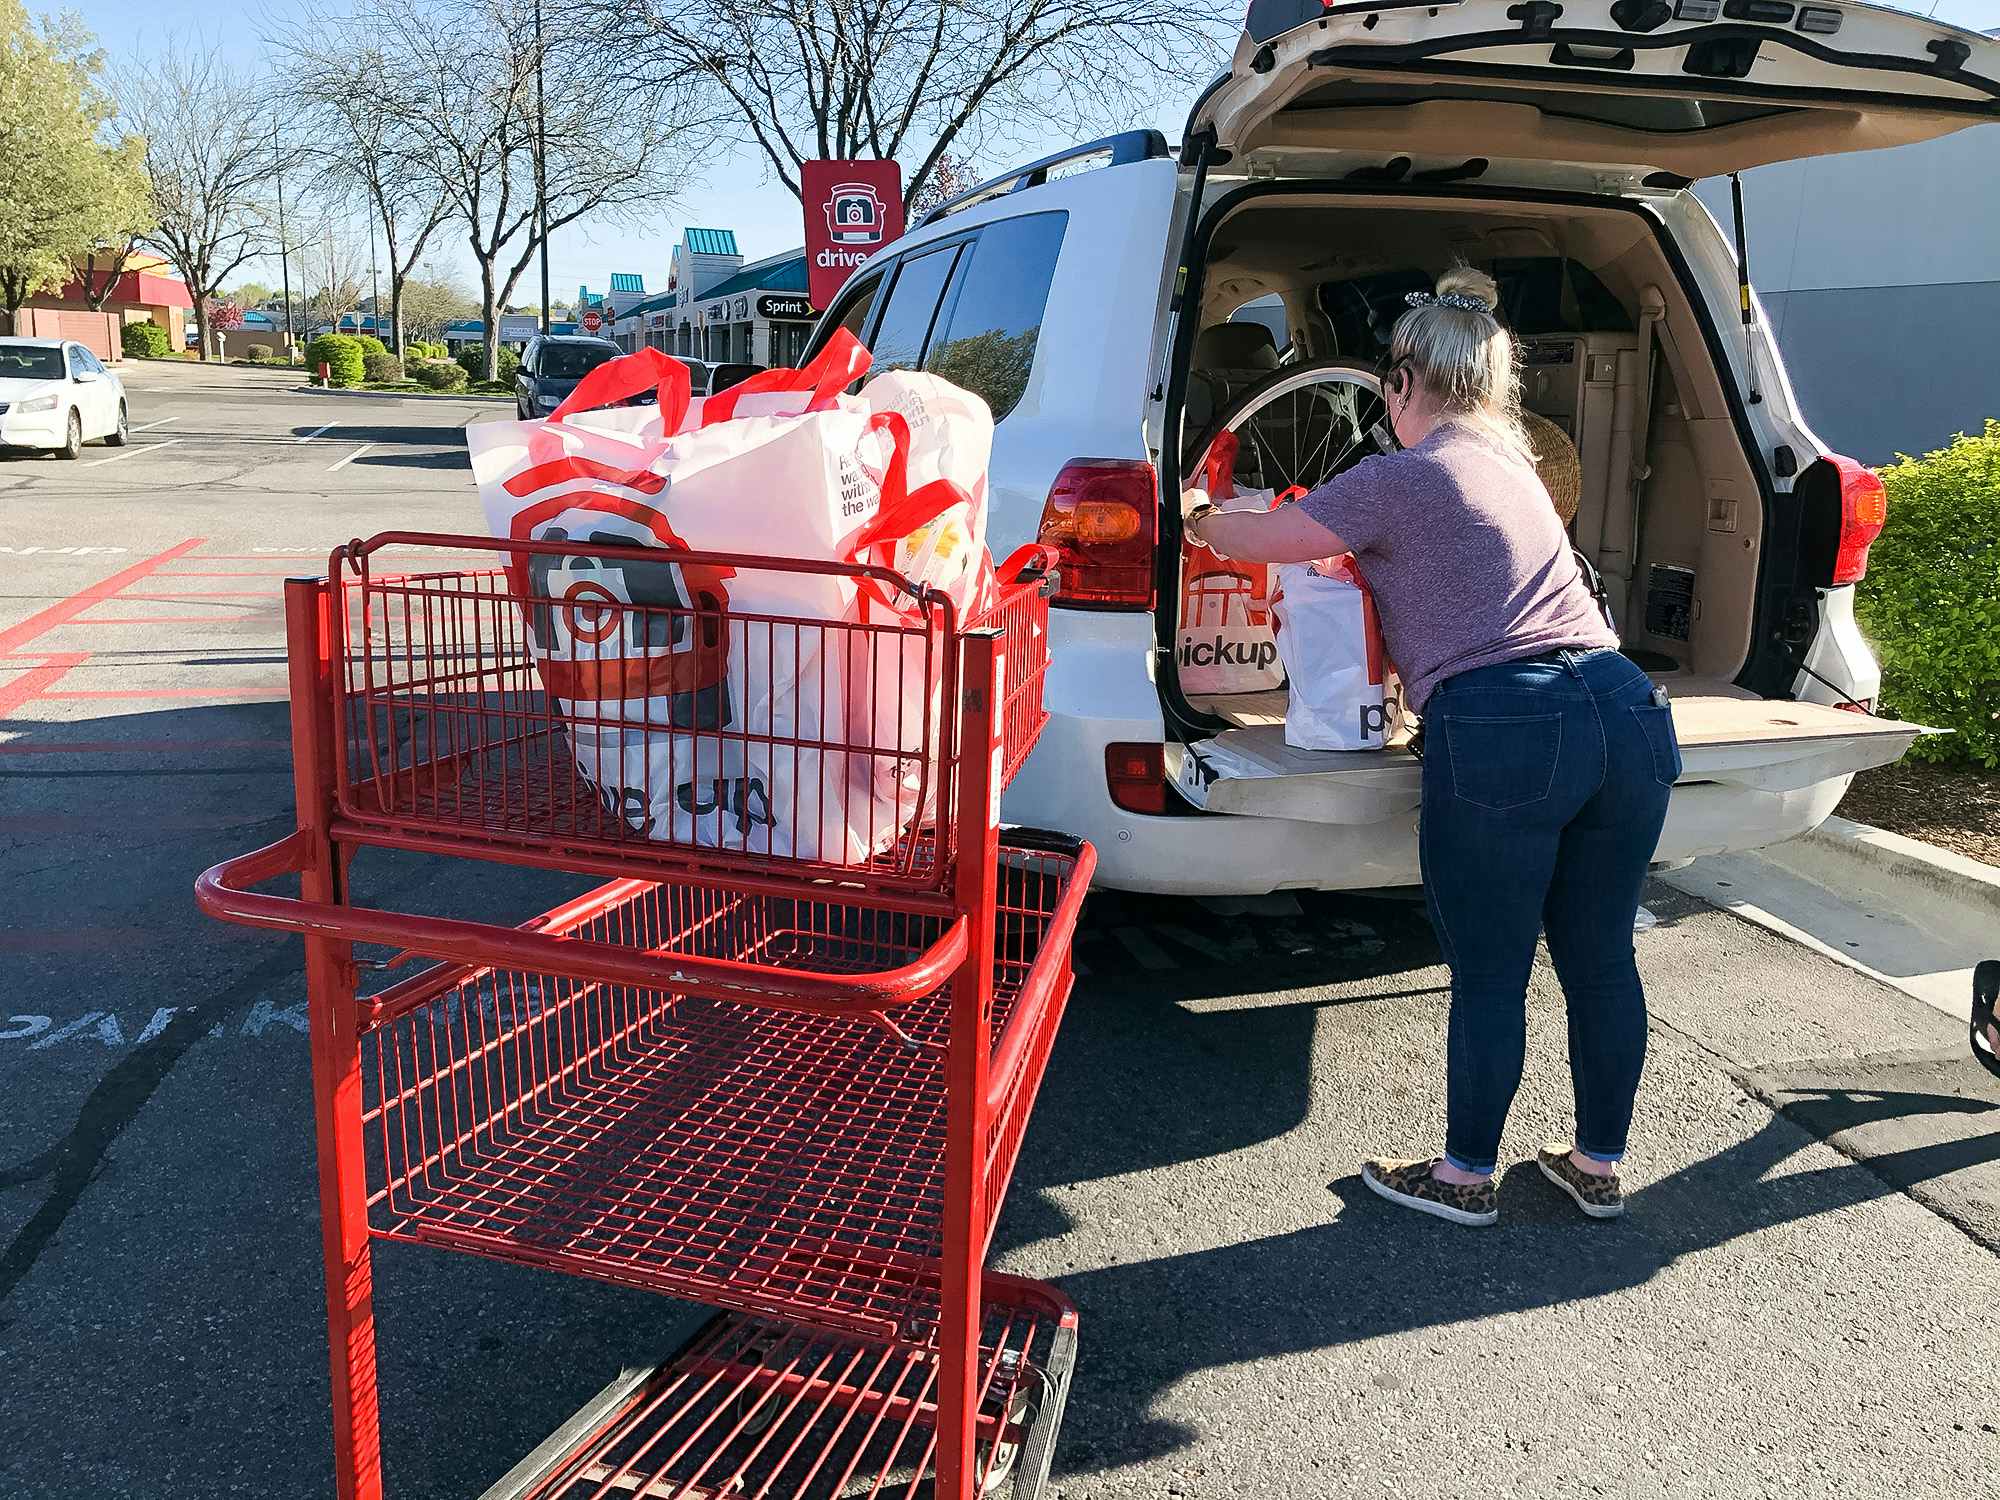 A person loading bags of groceries into the trunk of a vehicle next to a Target shopping cart.